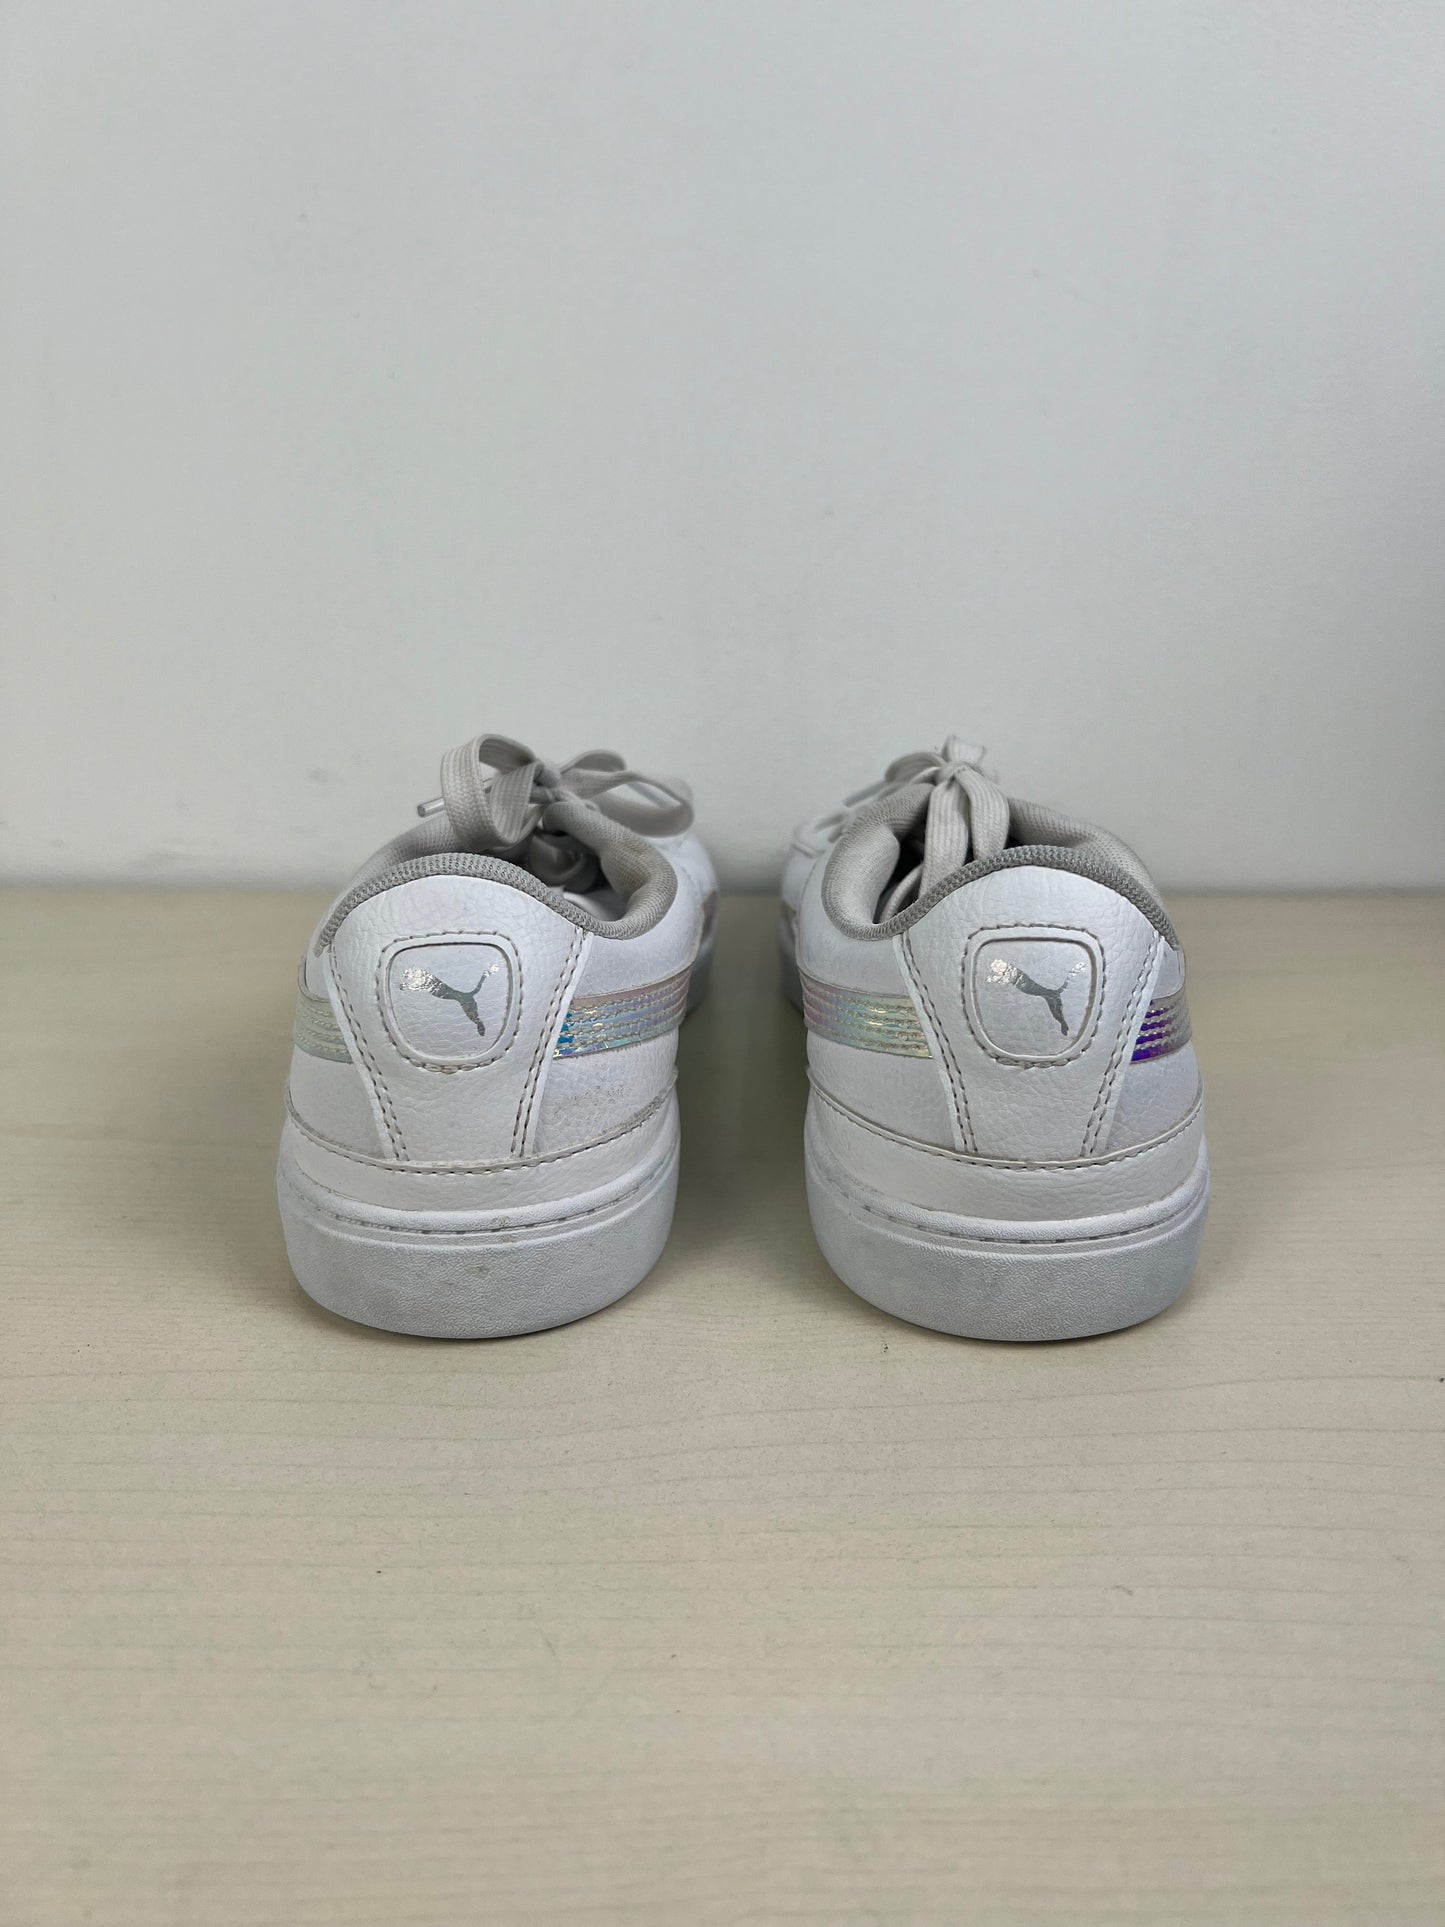 White Shoes Sneakers Puma, Size 9